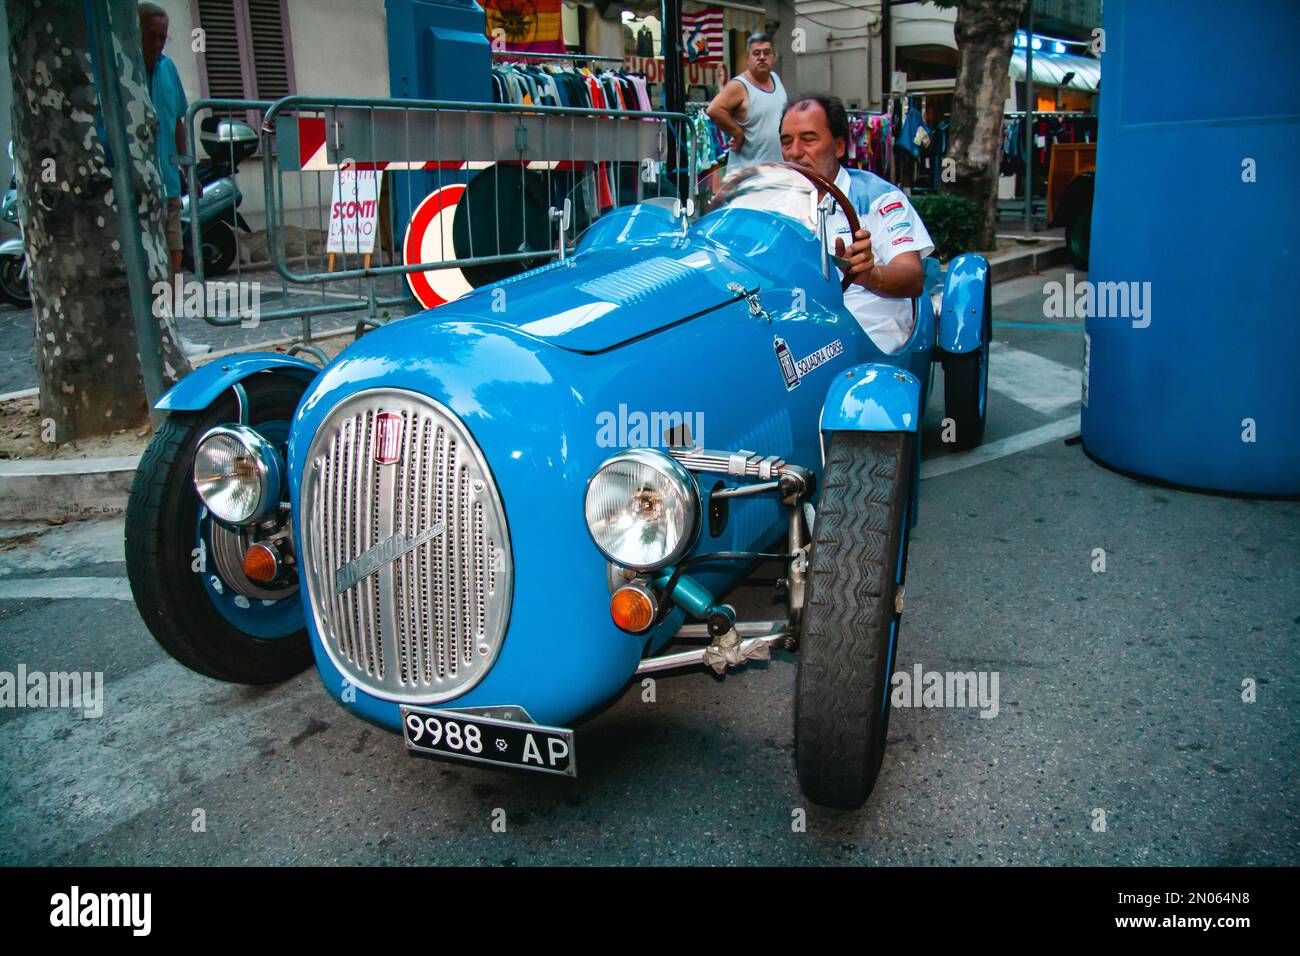 Vintage car at an outdoor event. An italian blue Fiat 500A Barchetta at an event for car collectors. A man driving a vintage Fiat 500 A Barchetta Stock Photo